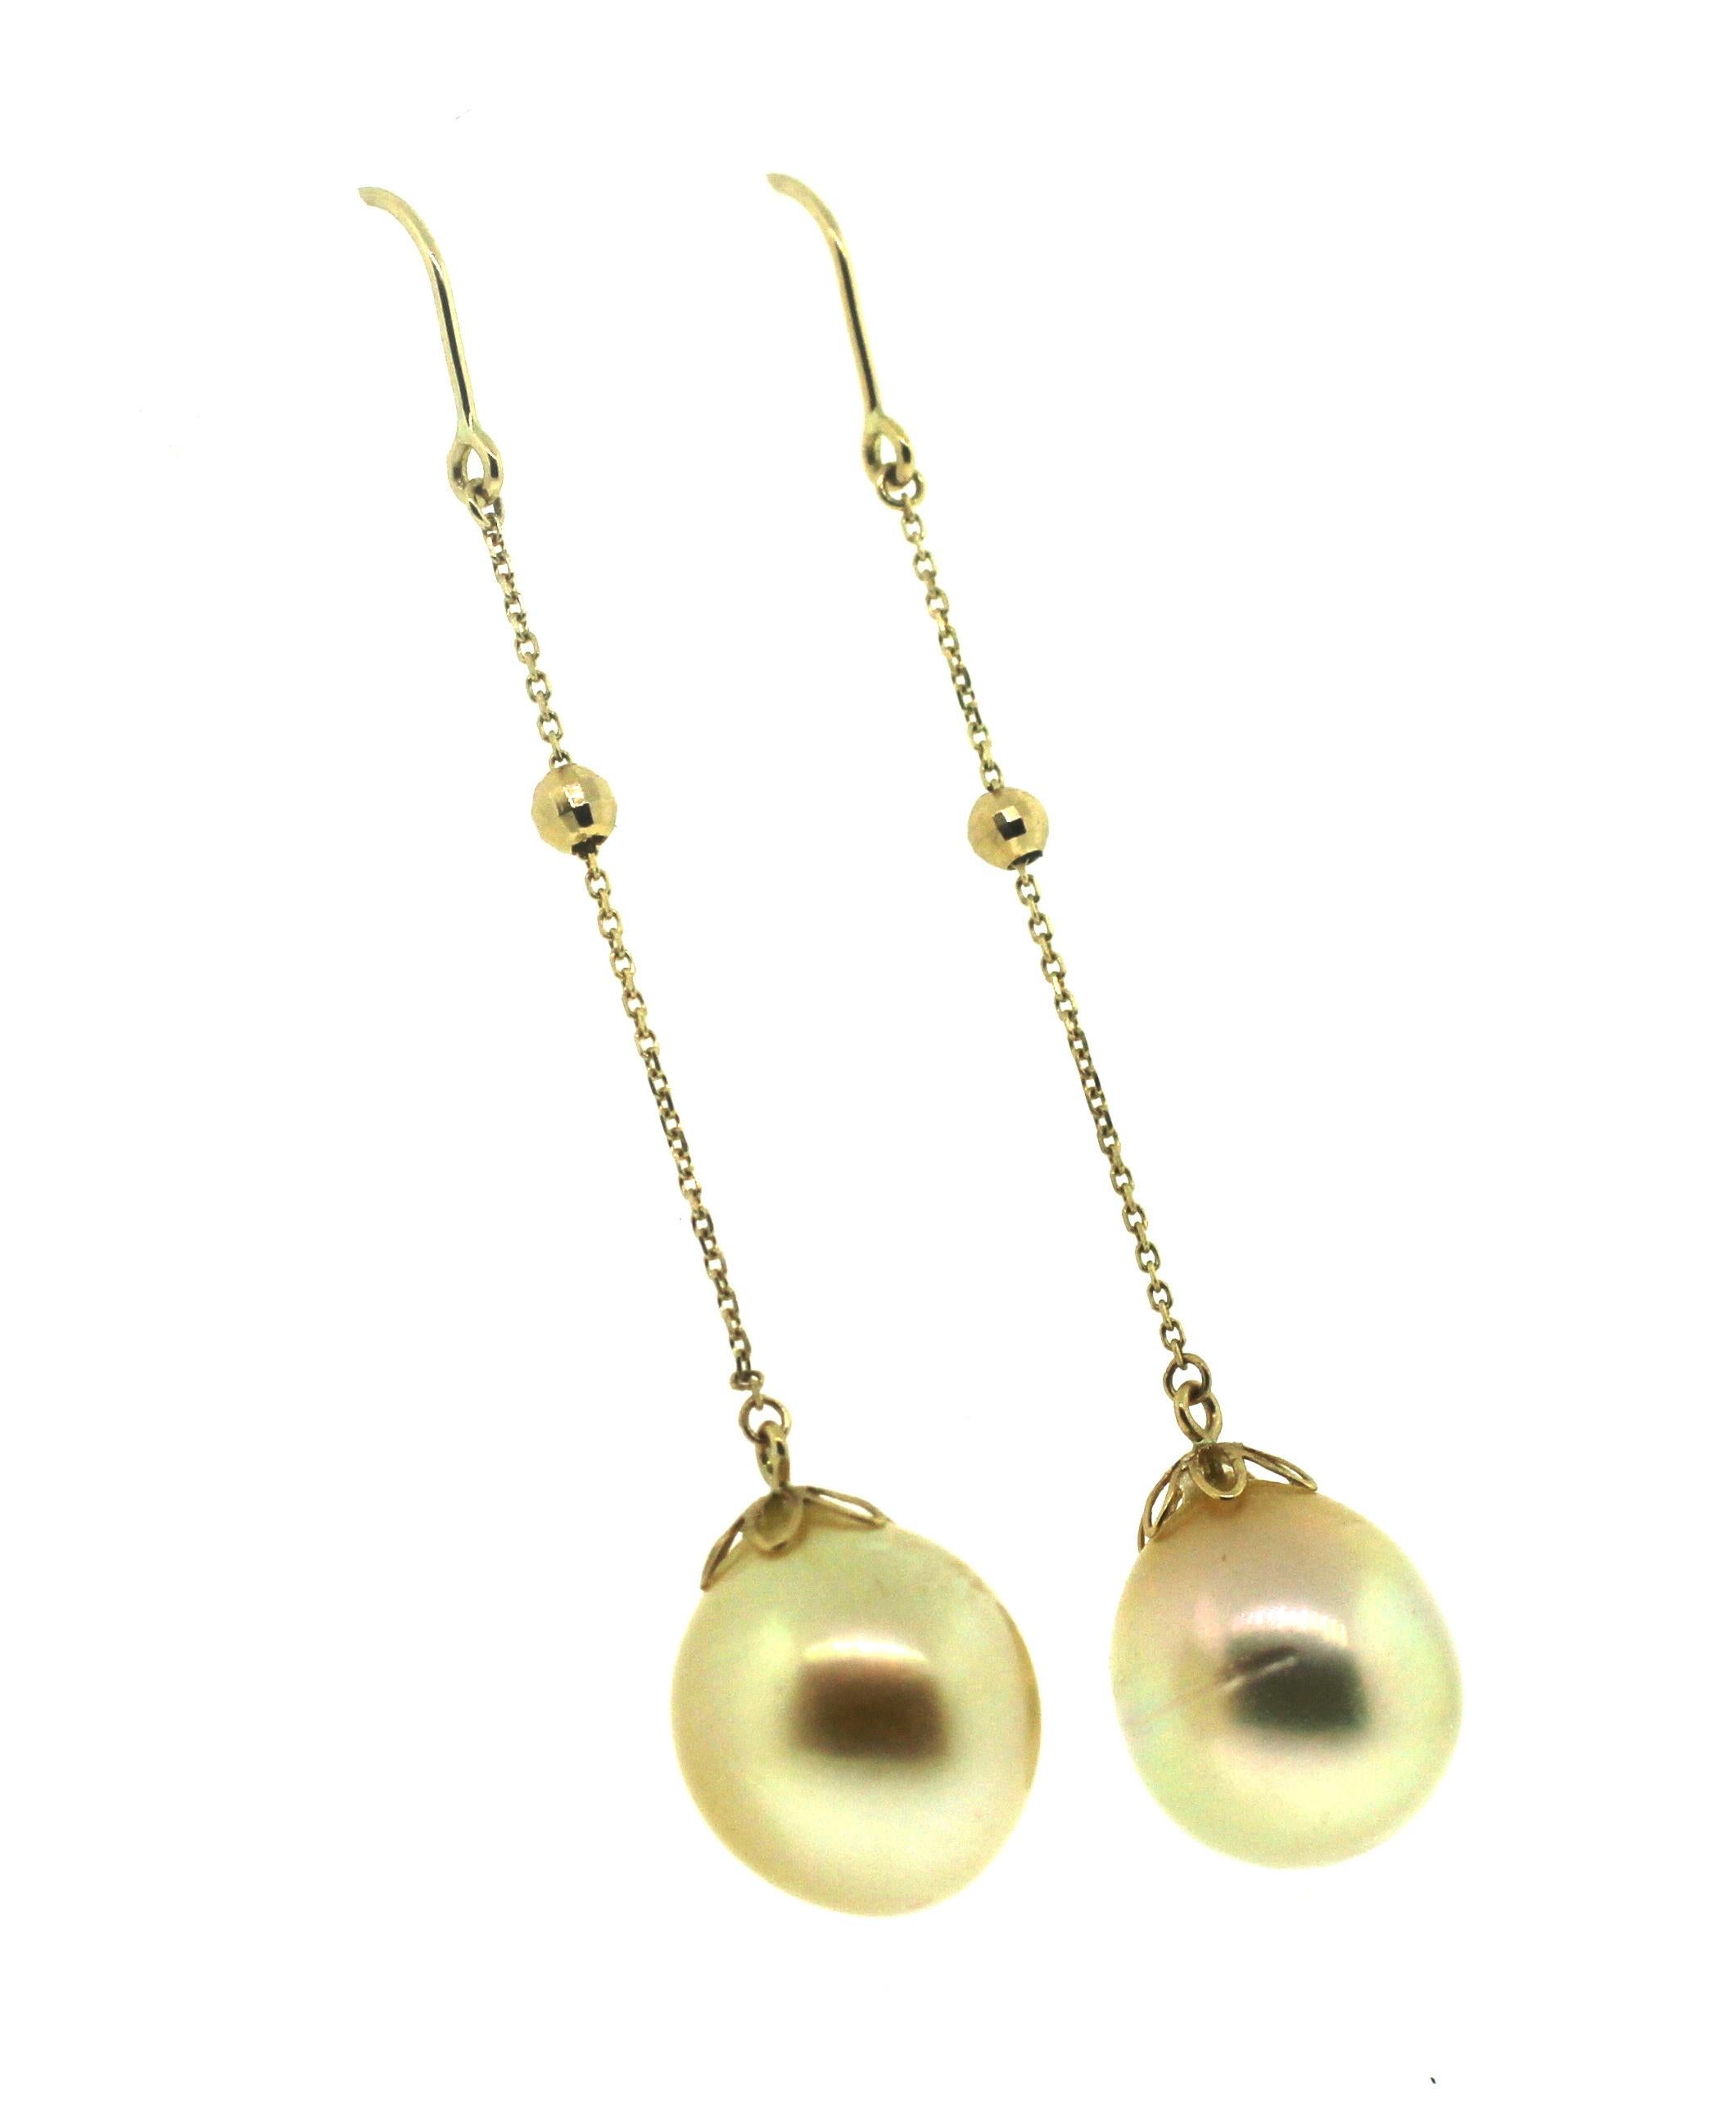 Hakimoto By Jewel Of Ocean
18K White Gold  
South Sea Culture Pearl Earrings.
Total item weight 6.3 grams
12-13mm  South Sea Drop Cultured Pearls
18K Yellow Gold High Polish
Orient: Very Good
Luster: Very Good
Nacre: Very Good